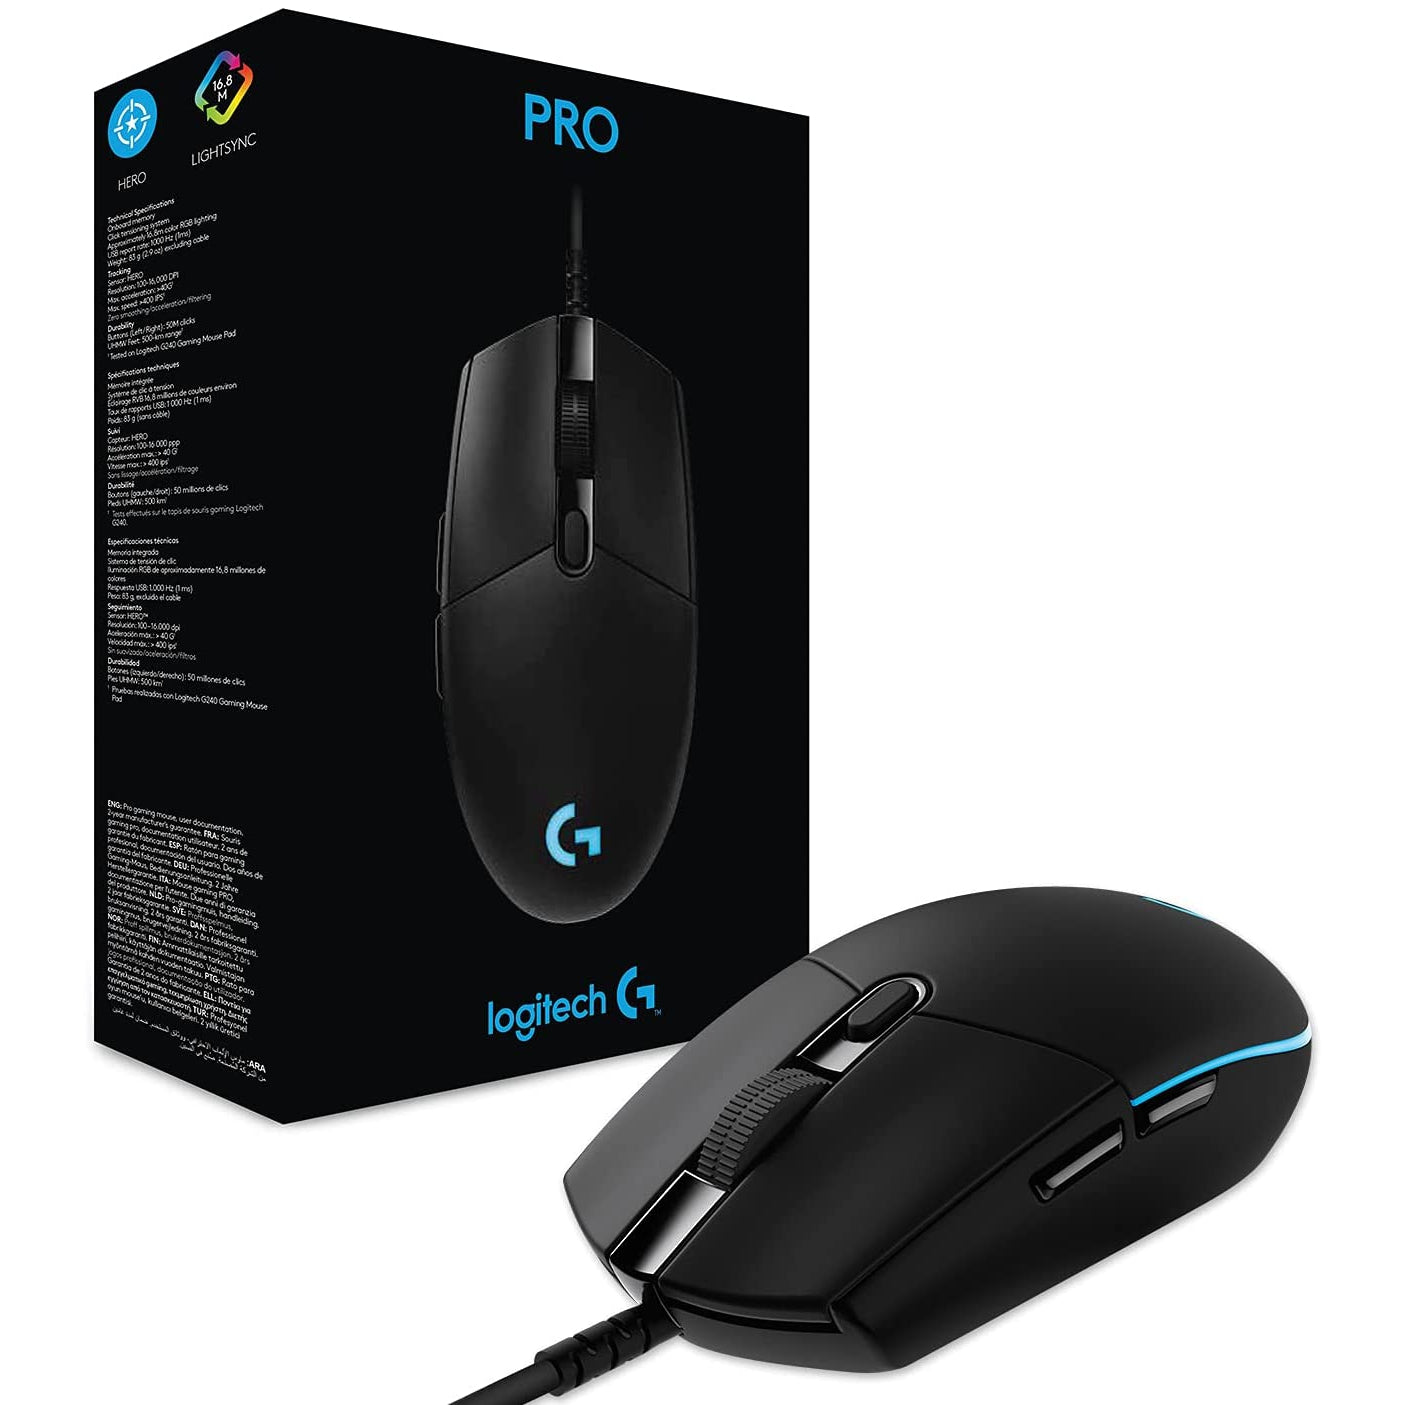 Logitech G PRO Hero Wired Gaming Mouse, Black